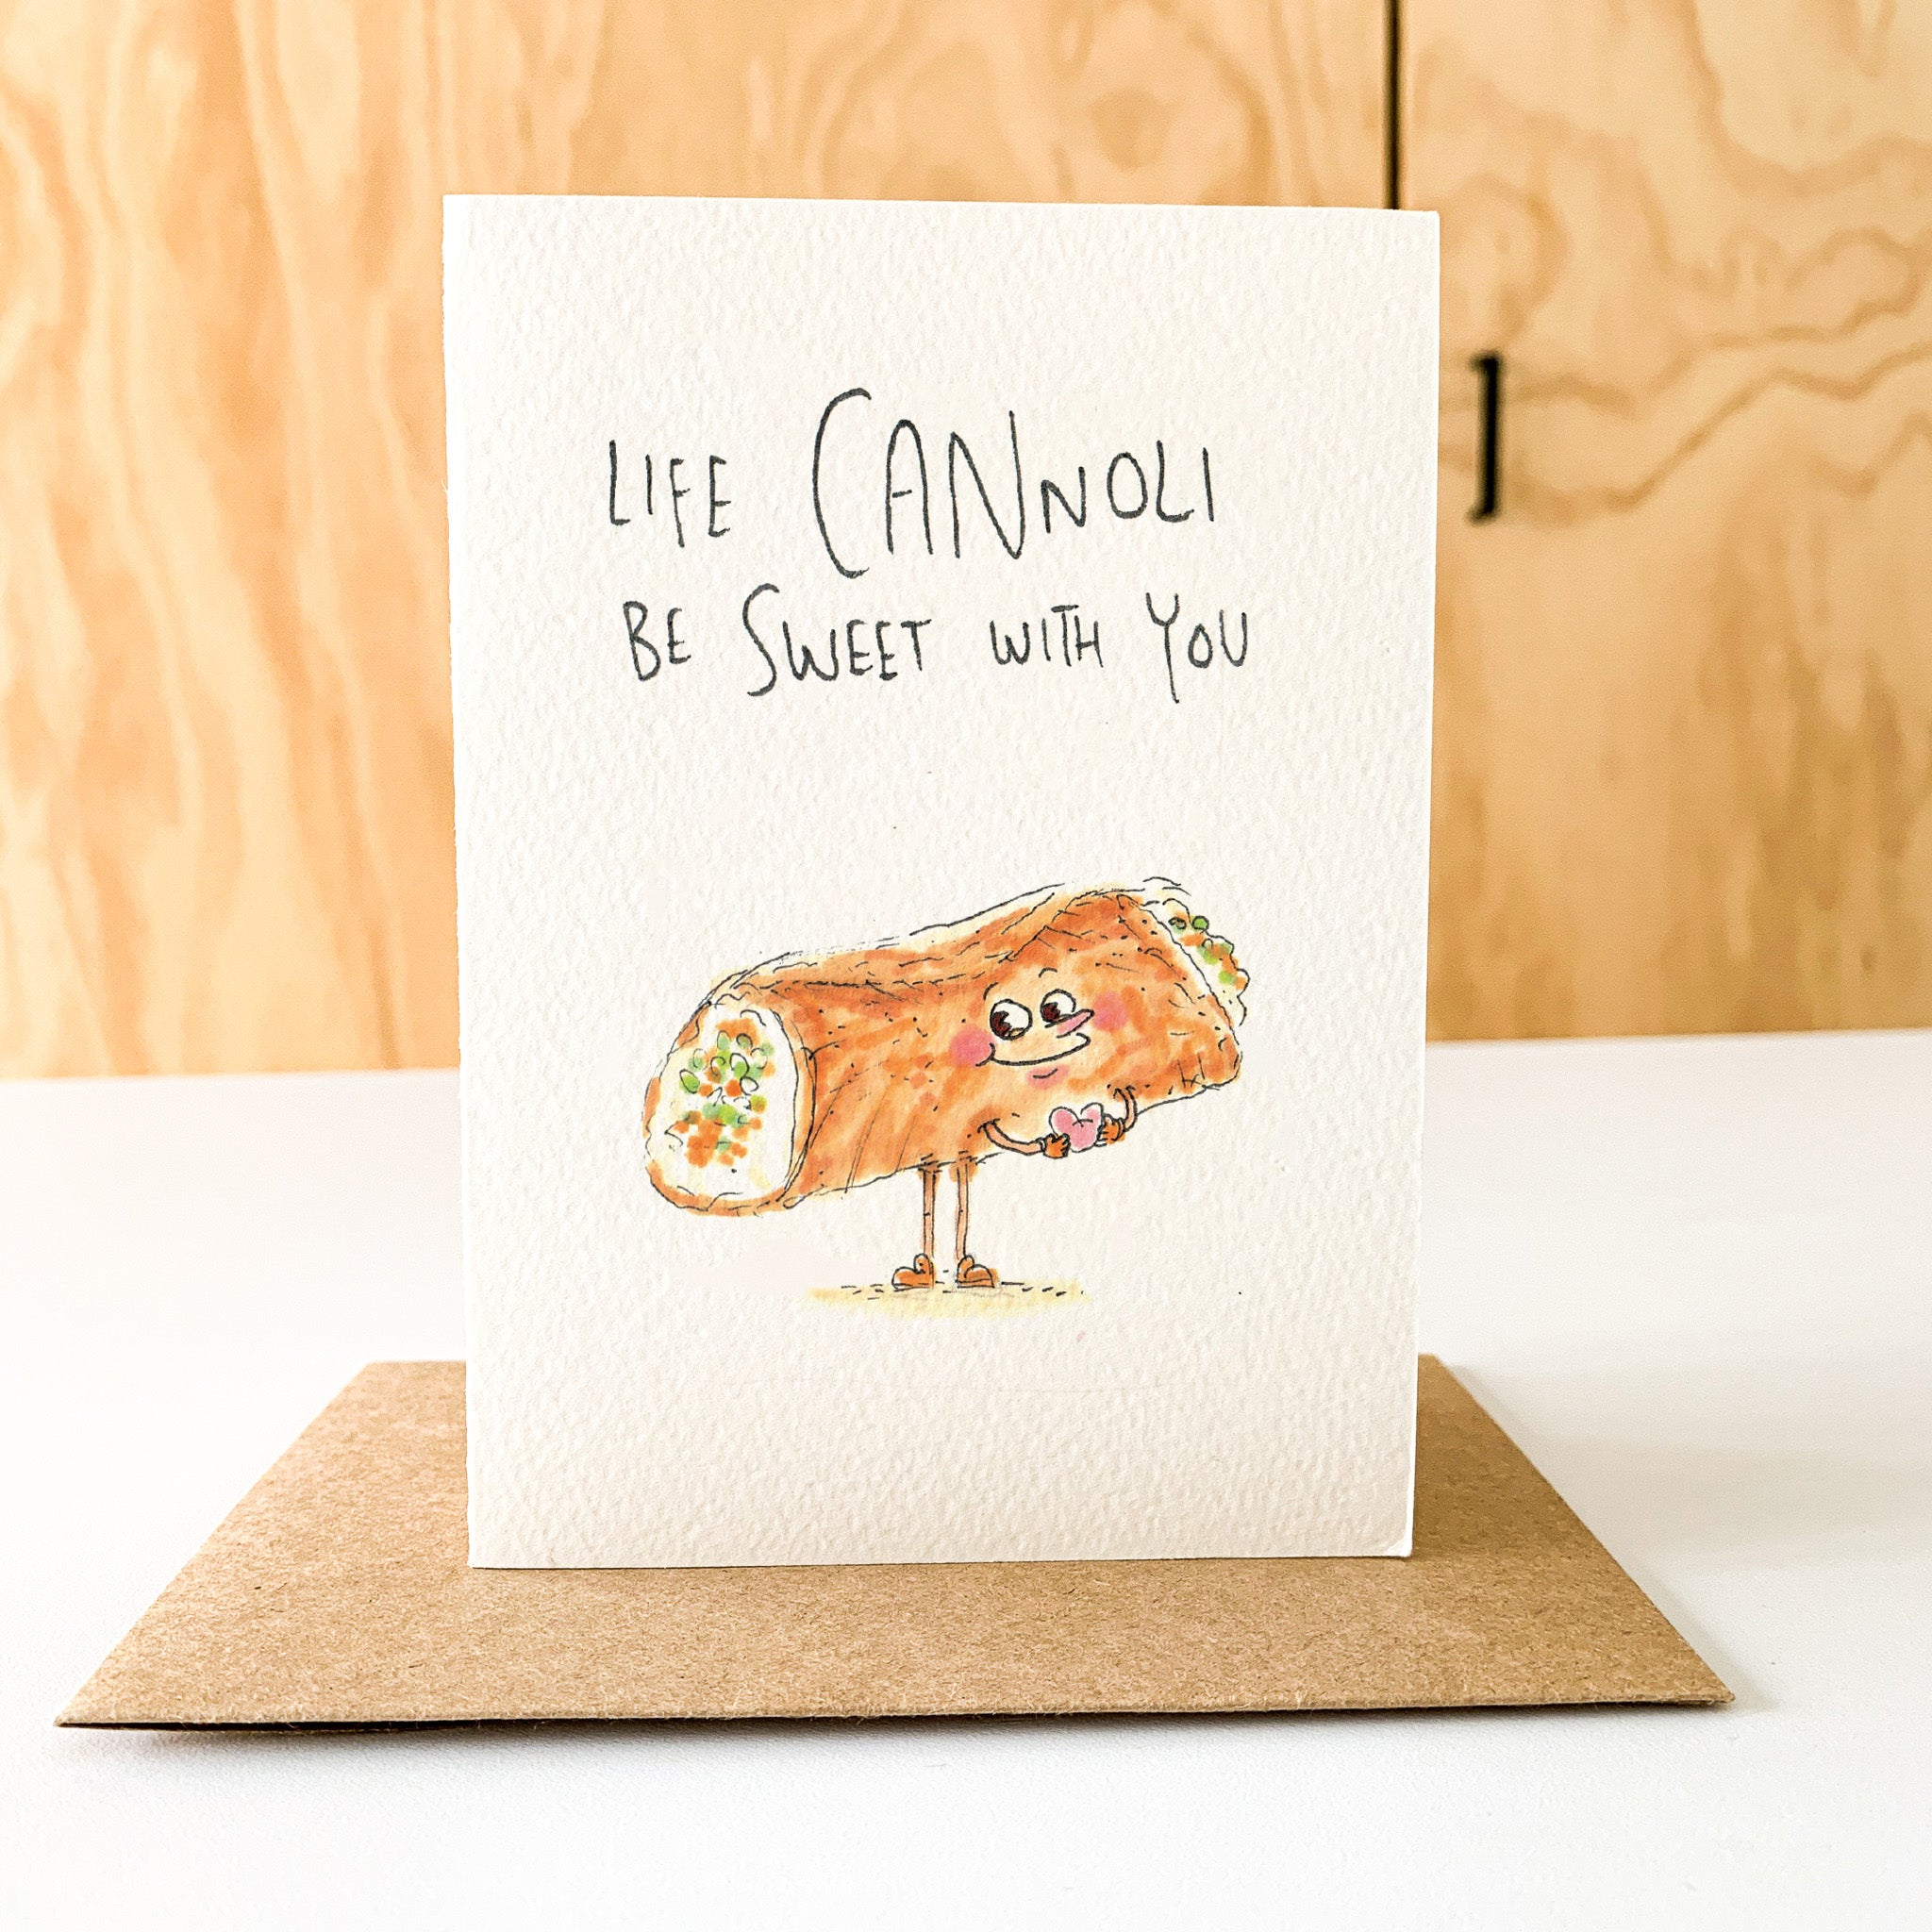 Life Cannoli Be Sweet With You